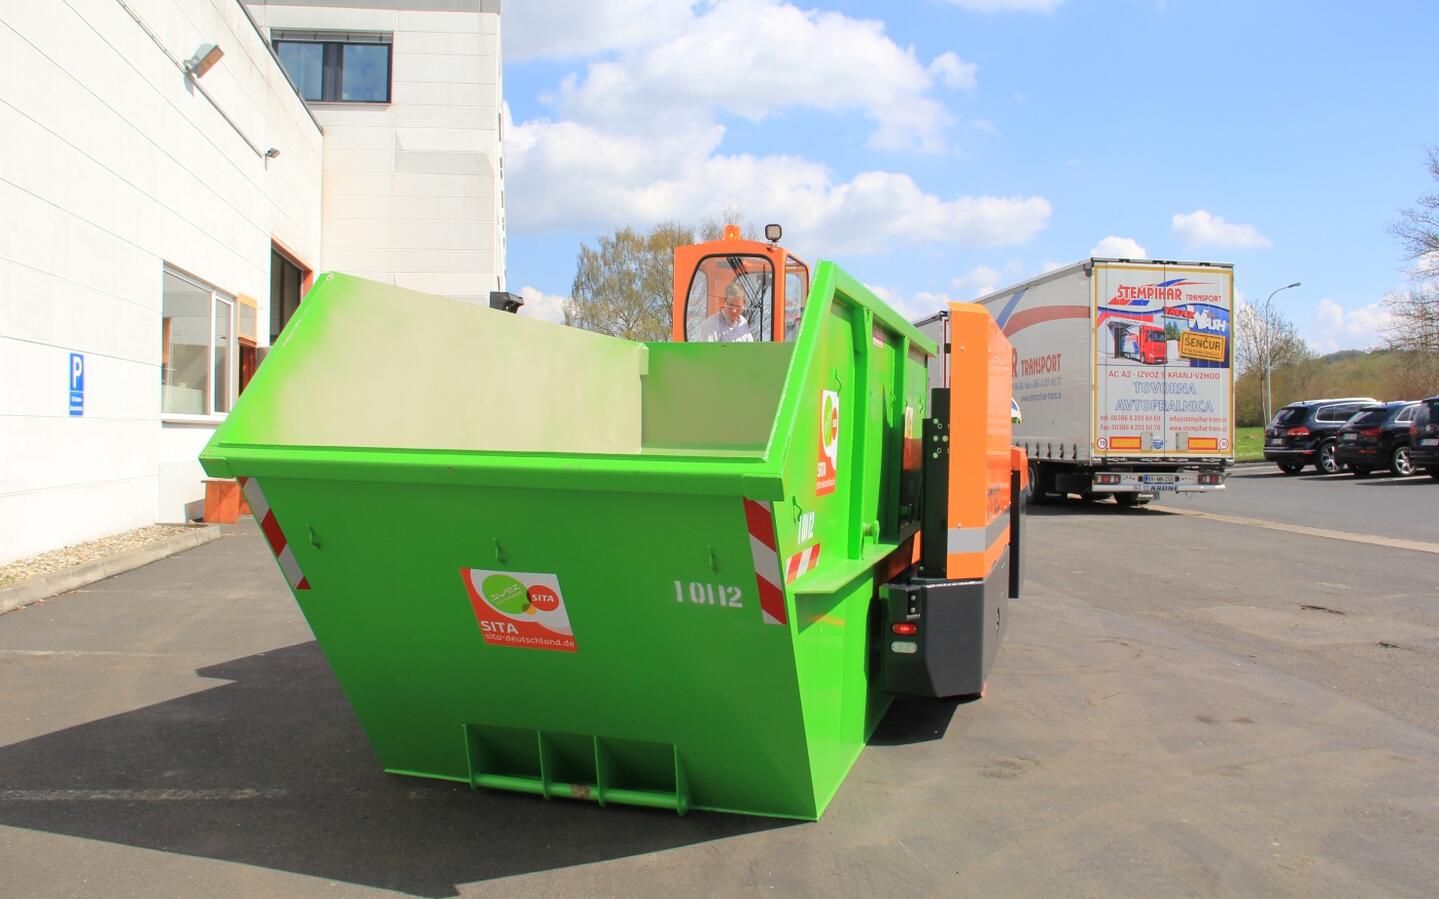 Skips and containers can be transported with the vehicle.